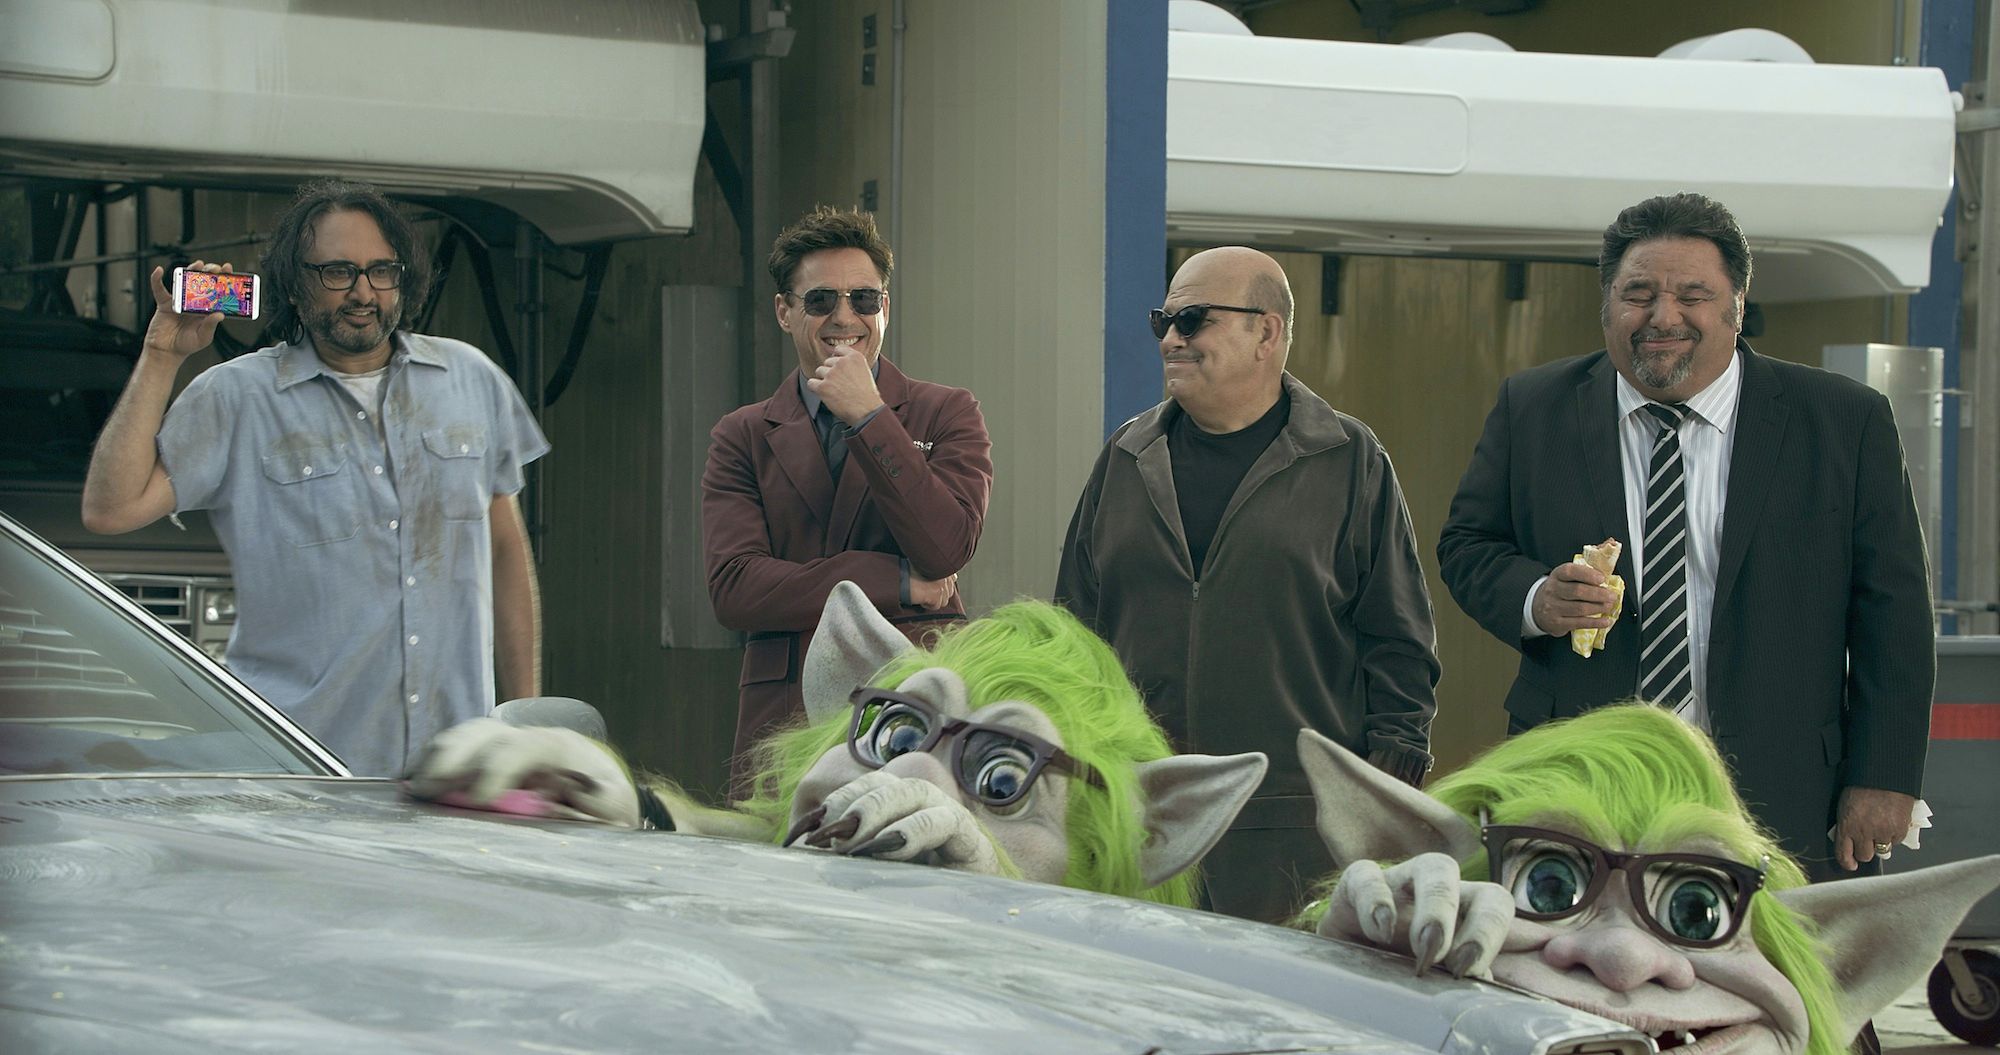 htc announces here s to change brand platform robert downey jr new face of htc image 1